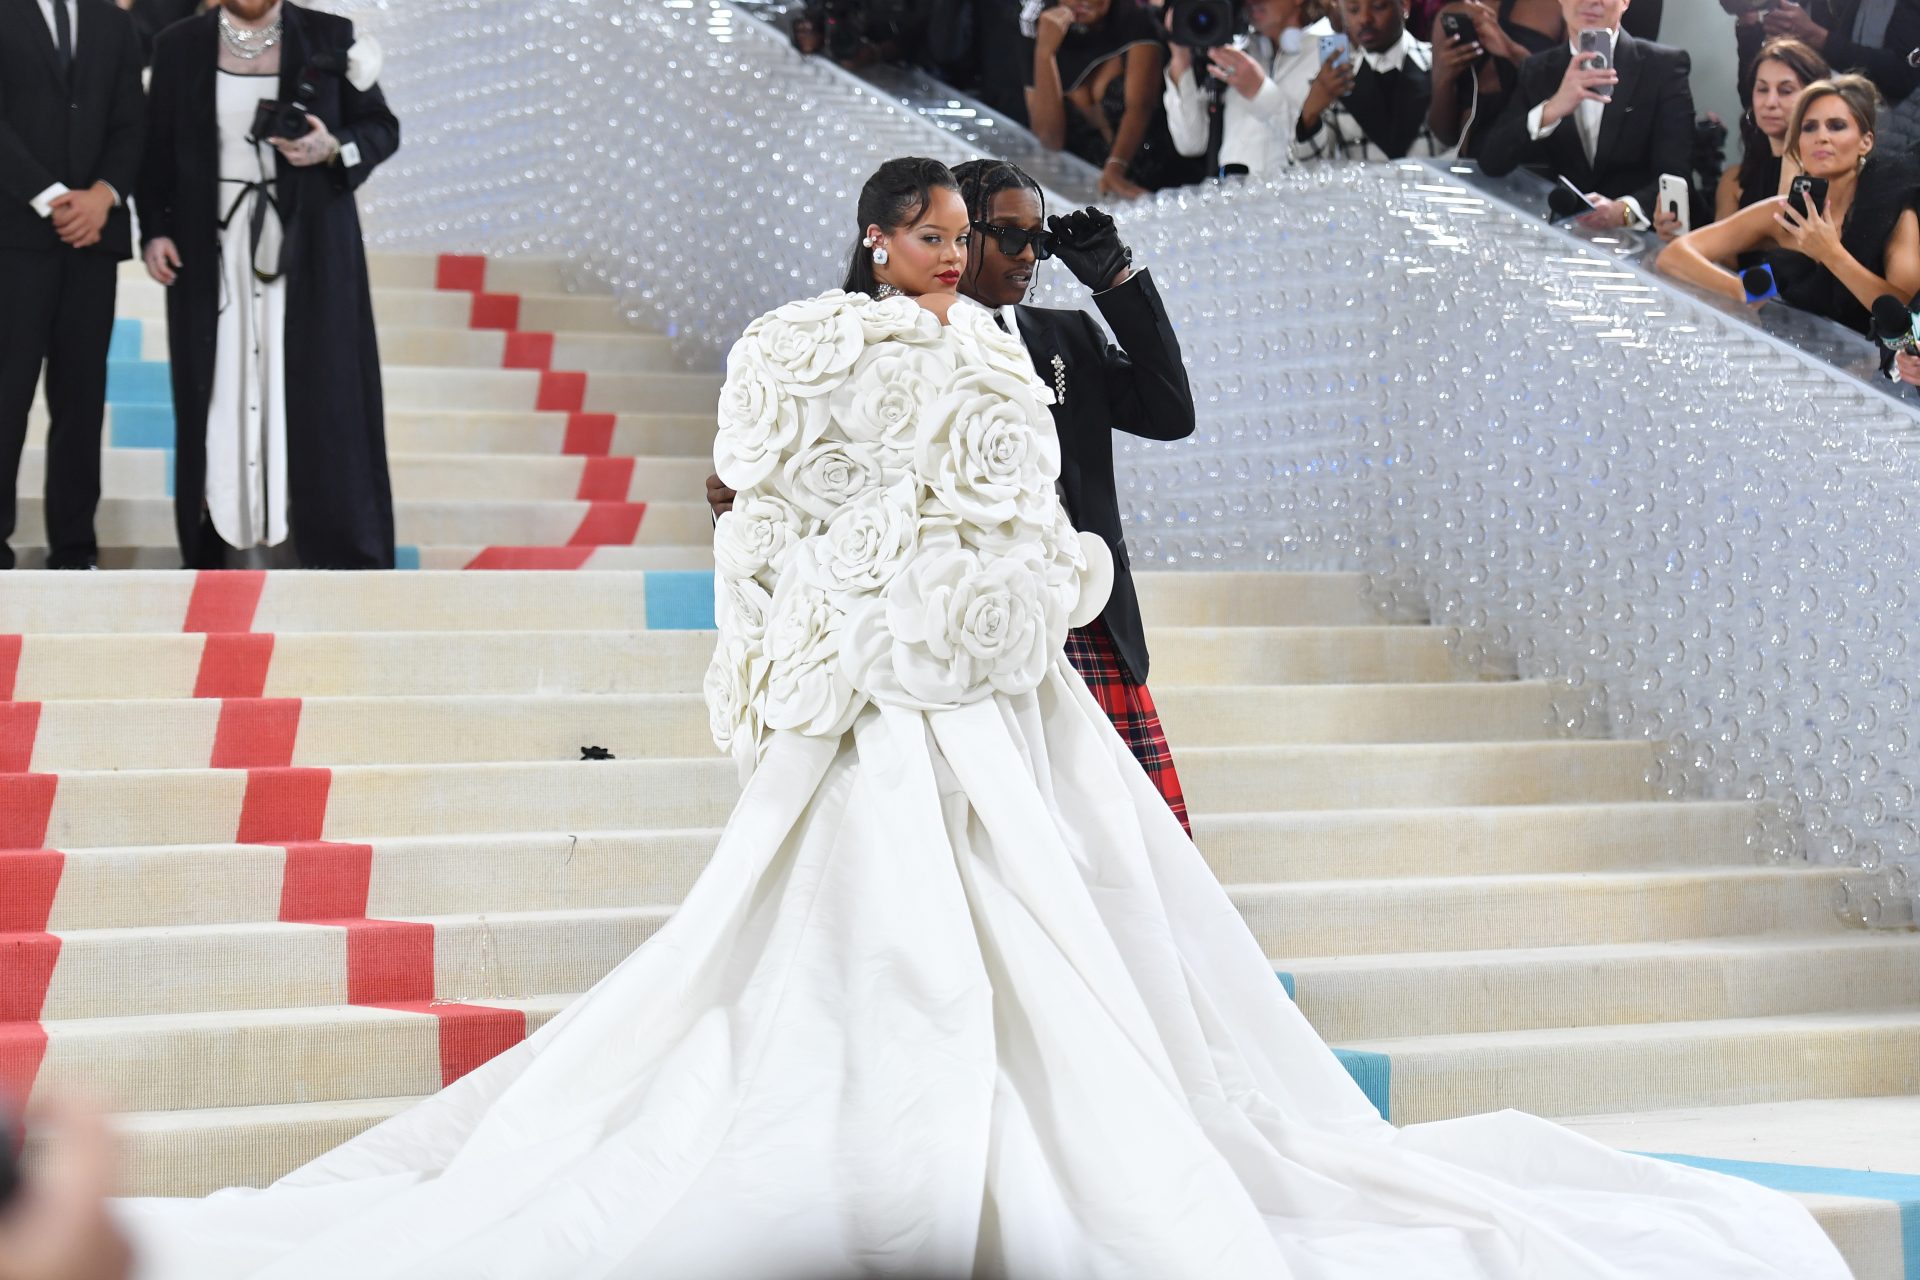 The 30 Best Met Gala Outfits to Inspire Your Wedding Look